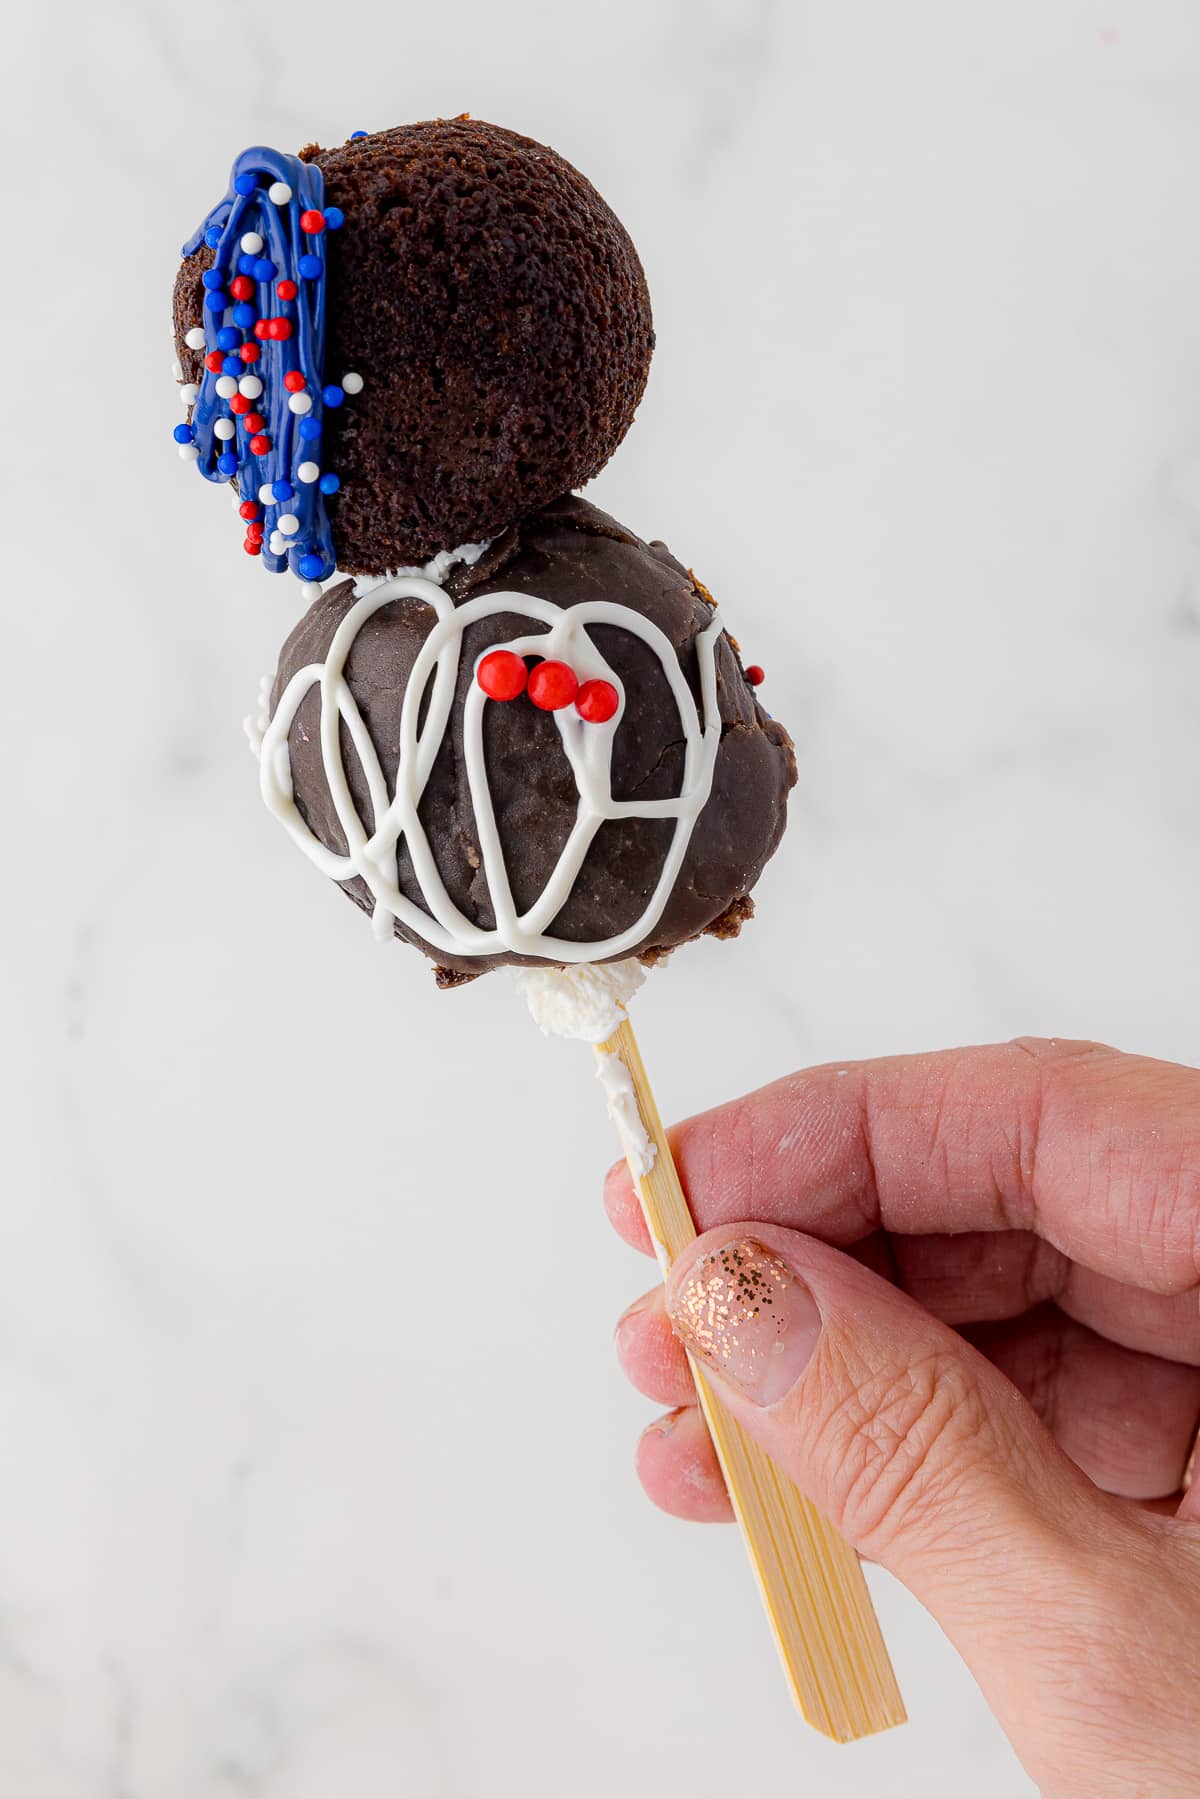 two hostess bouncers on a skewer decorated with red white and blue melted chocolate.